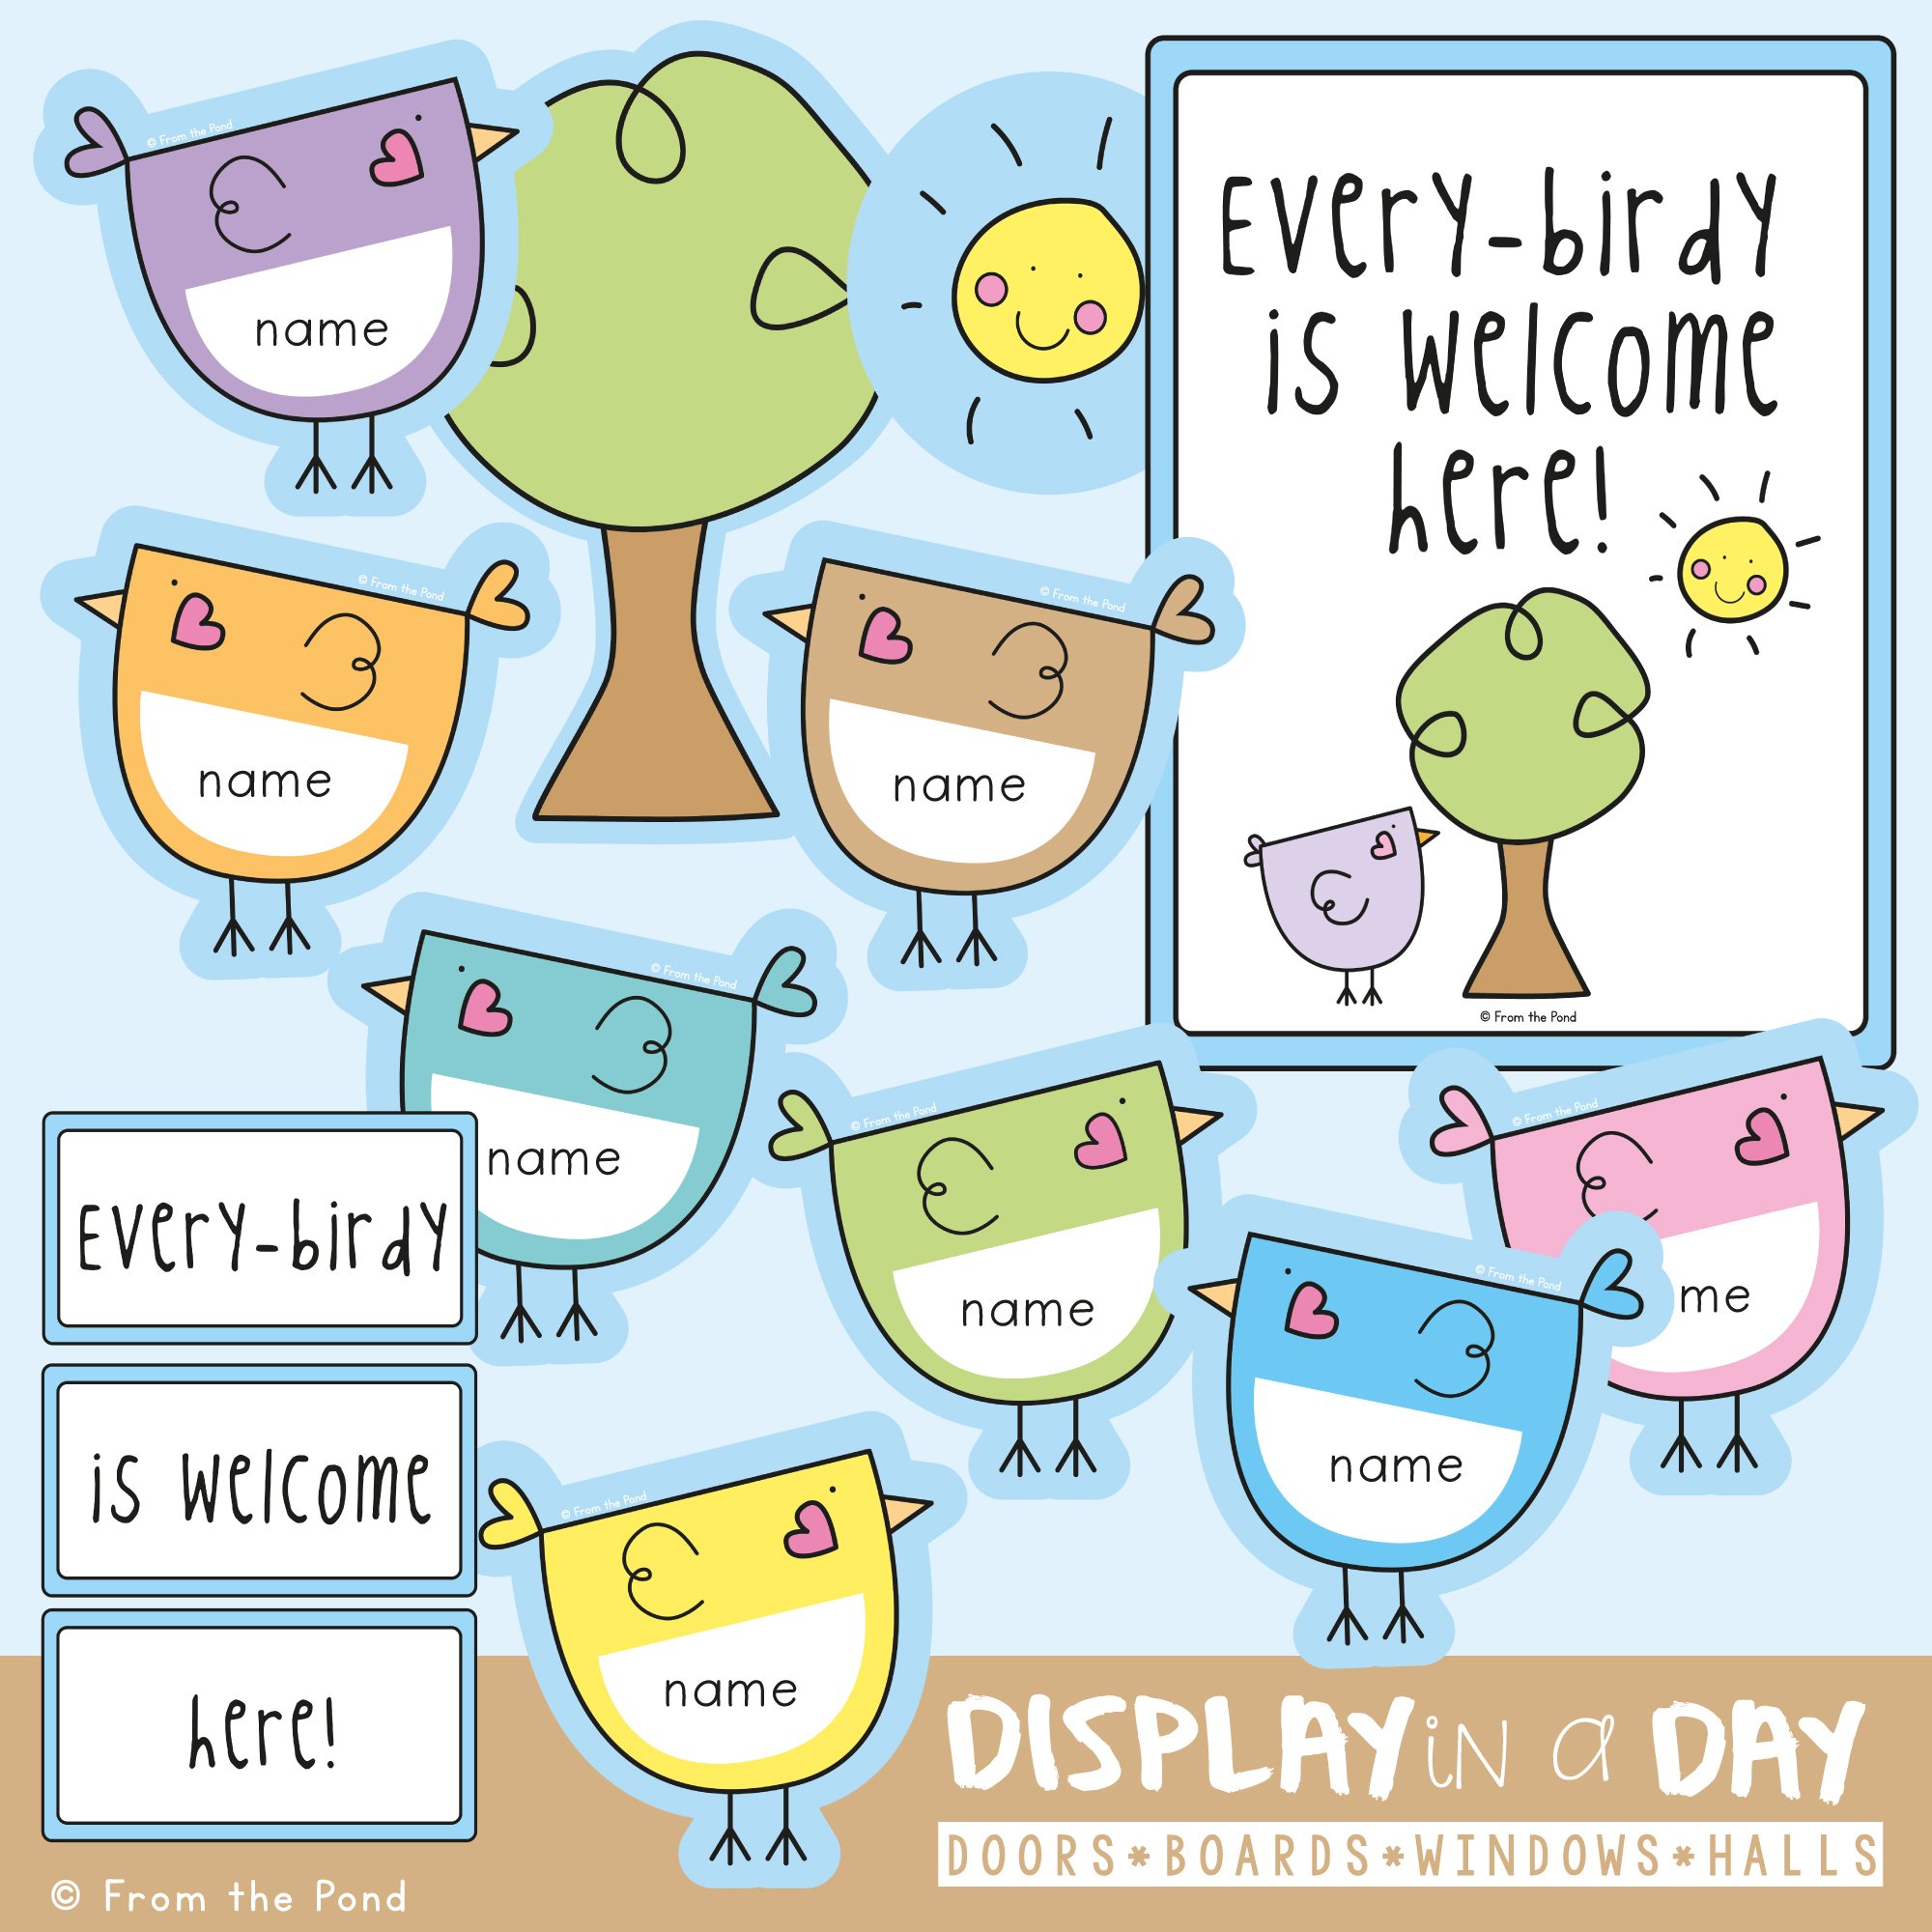 Every-birdy is Welcome!